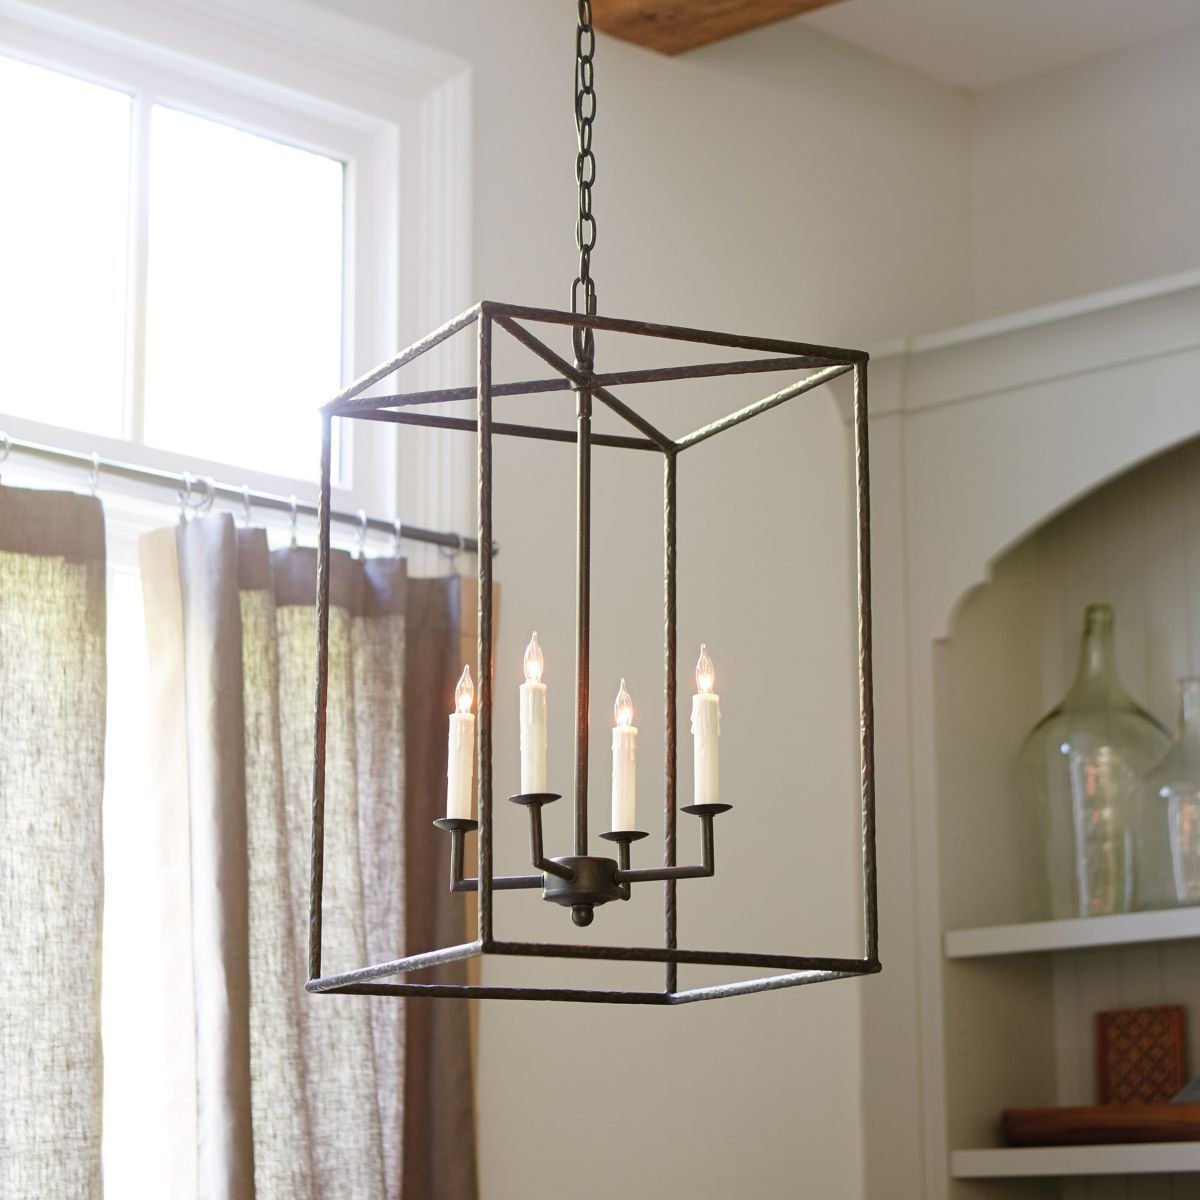 Hadley 4 Light Pendant Chandelier | Home In 2019 | Pendant Within Odie 4 Light Lantern Square Pendants (View 20 of 30)